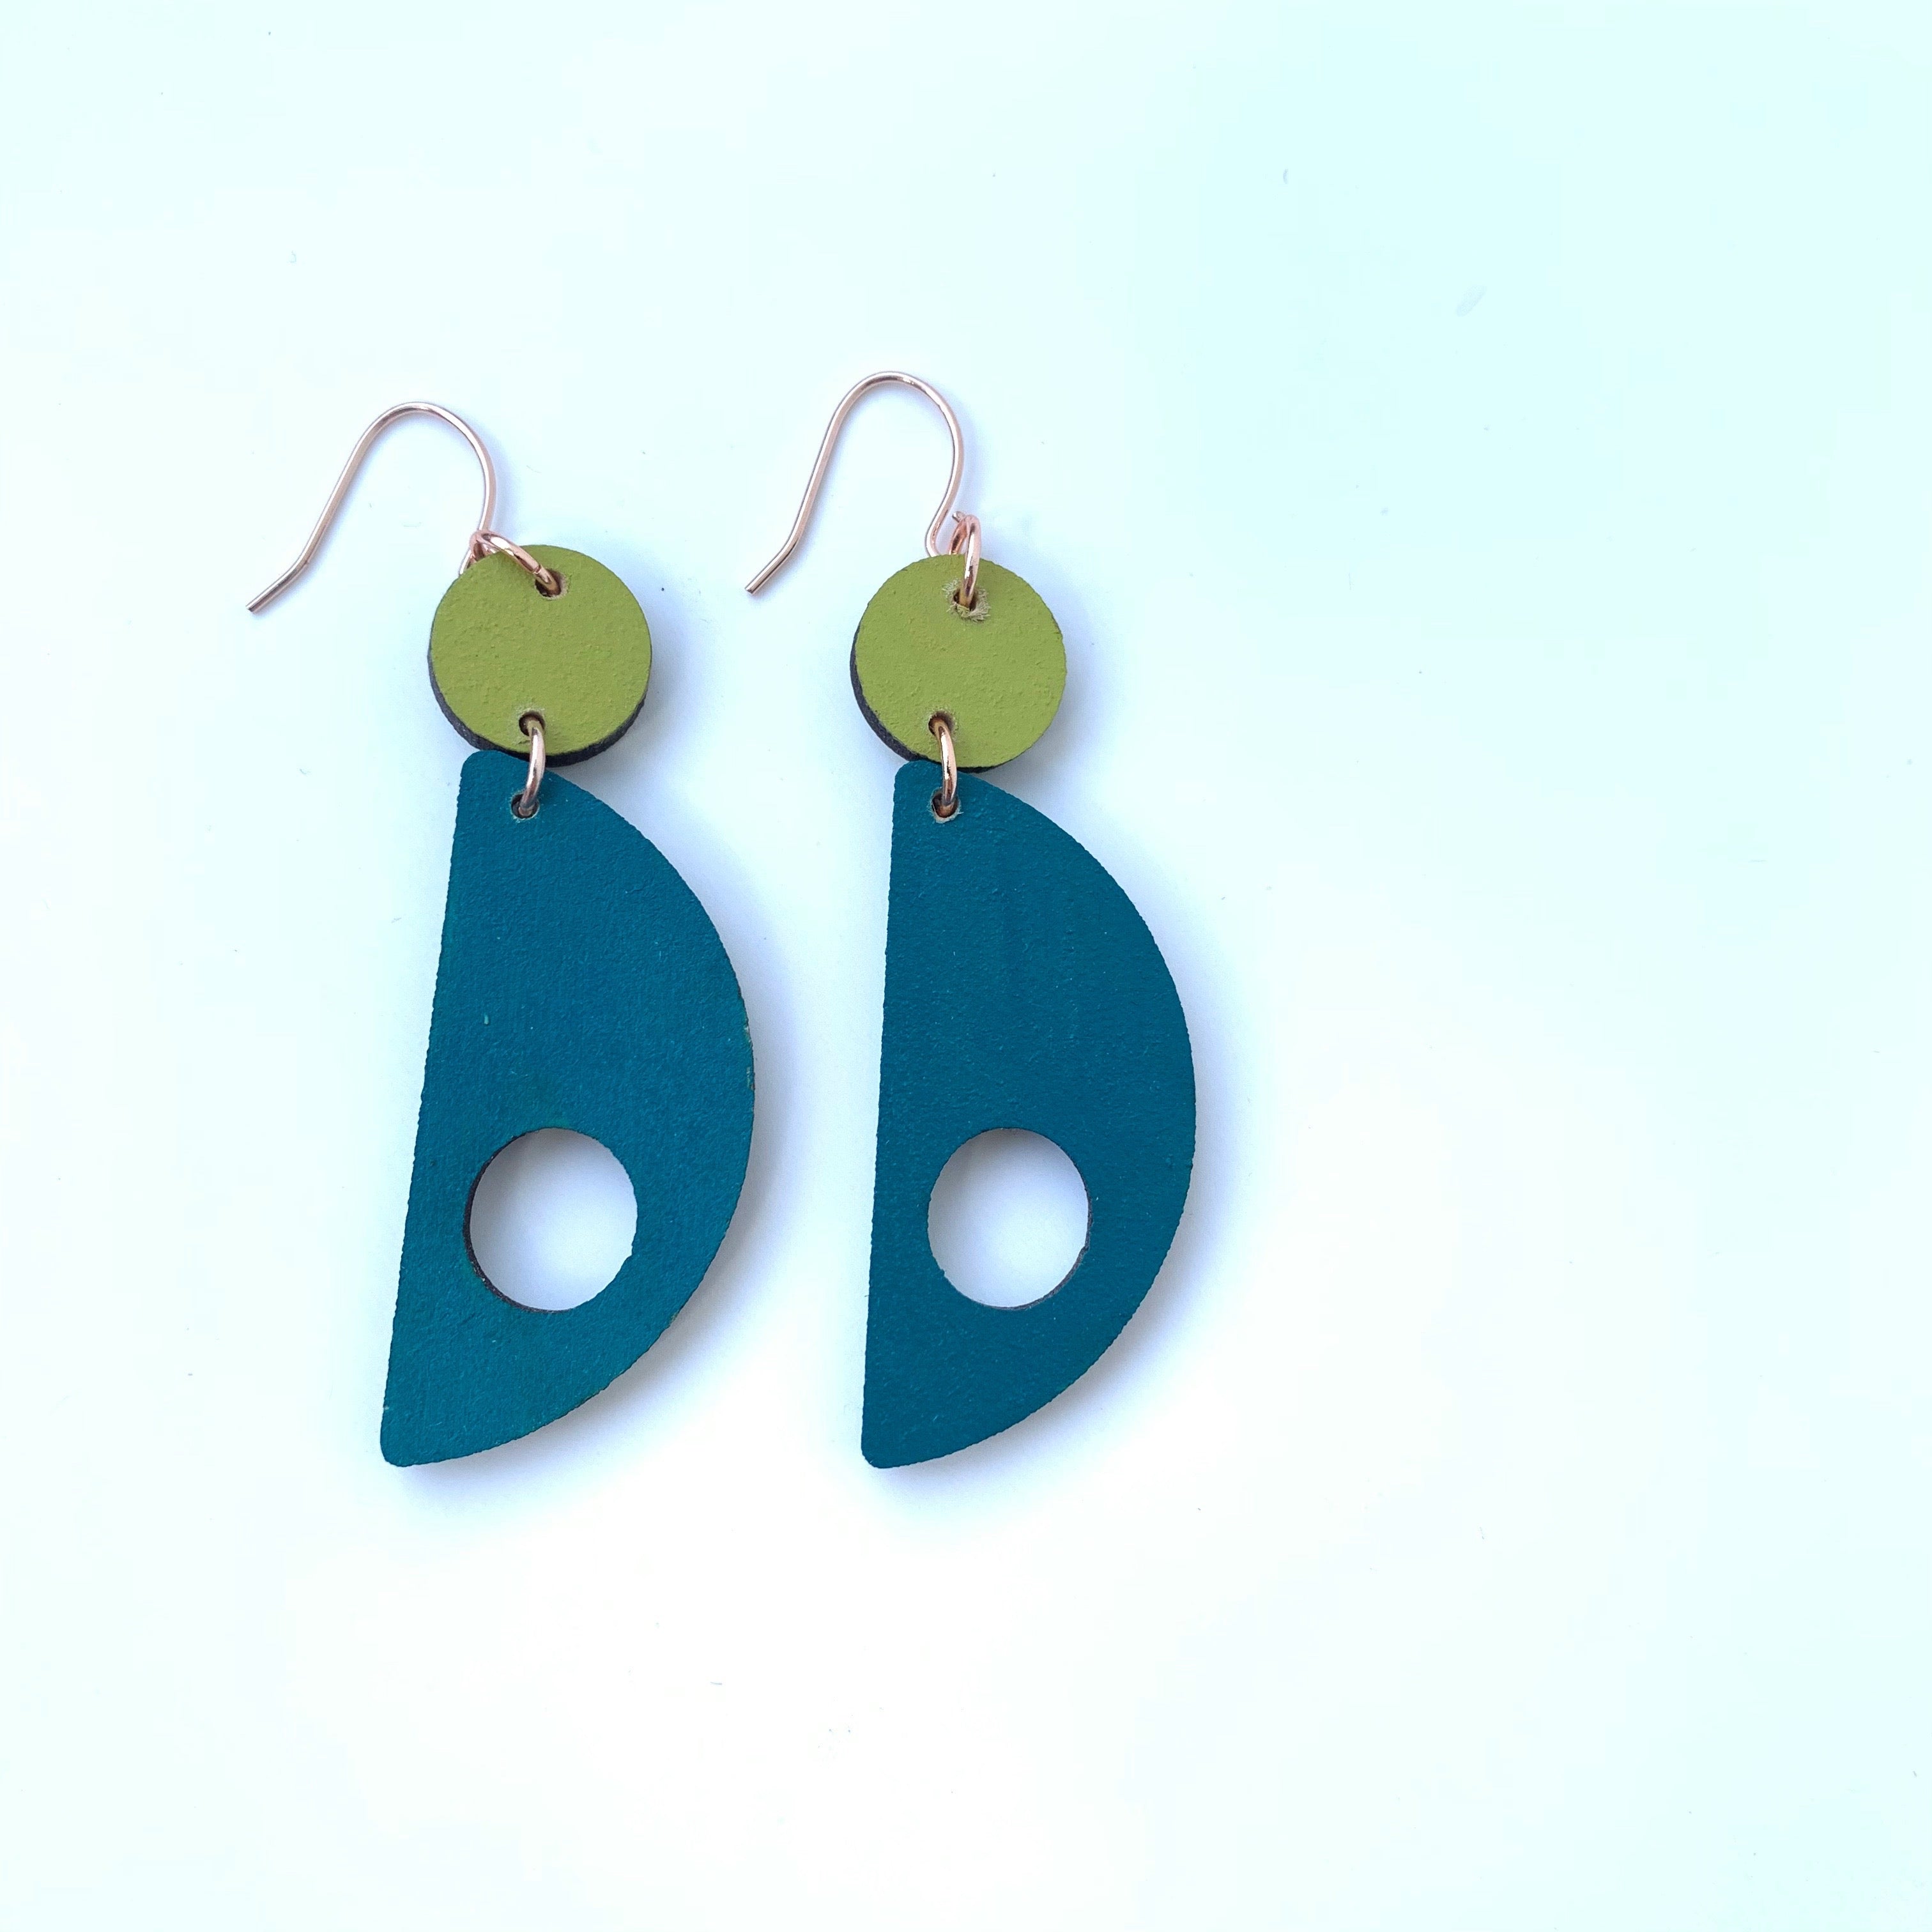 Modernist geometric Earrings by Forme Jewellery in teal and green